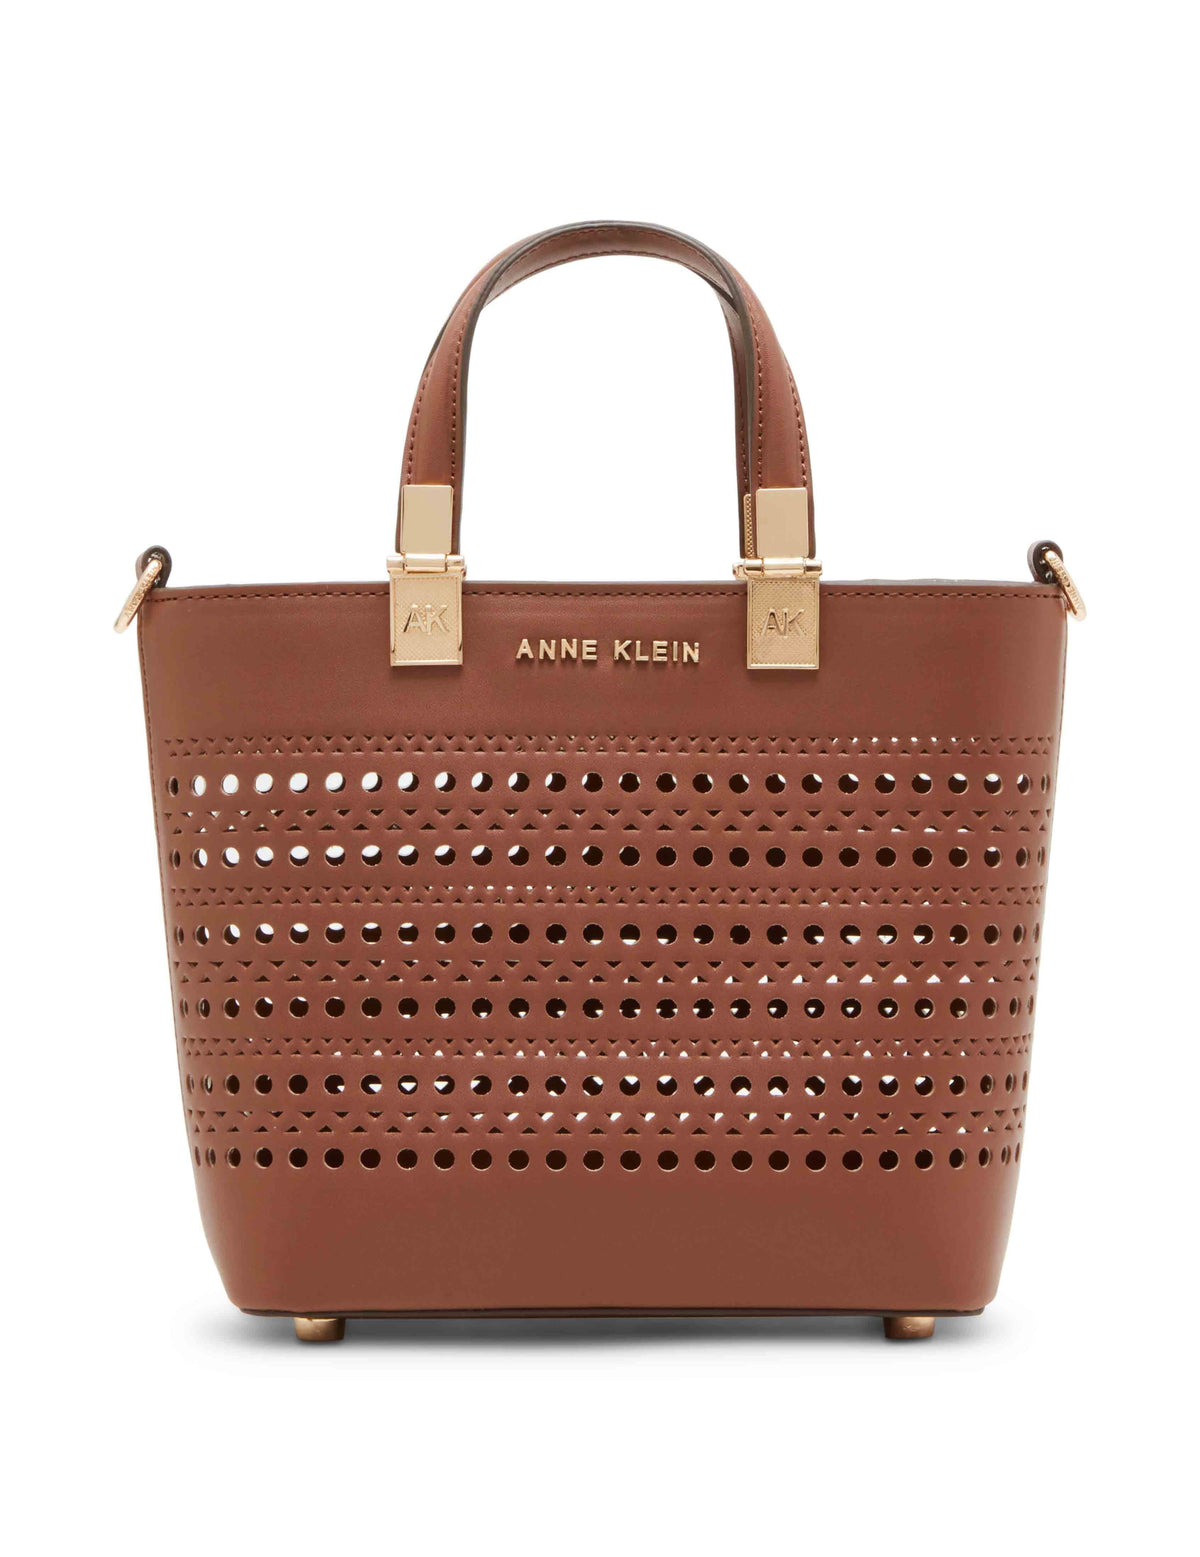 Anne Klein Chestnut/Gold Perforated Mini Satchel With Convertible Straw Crossbody